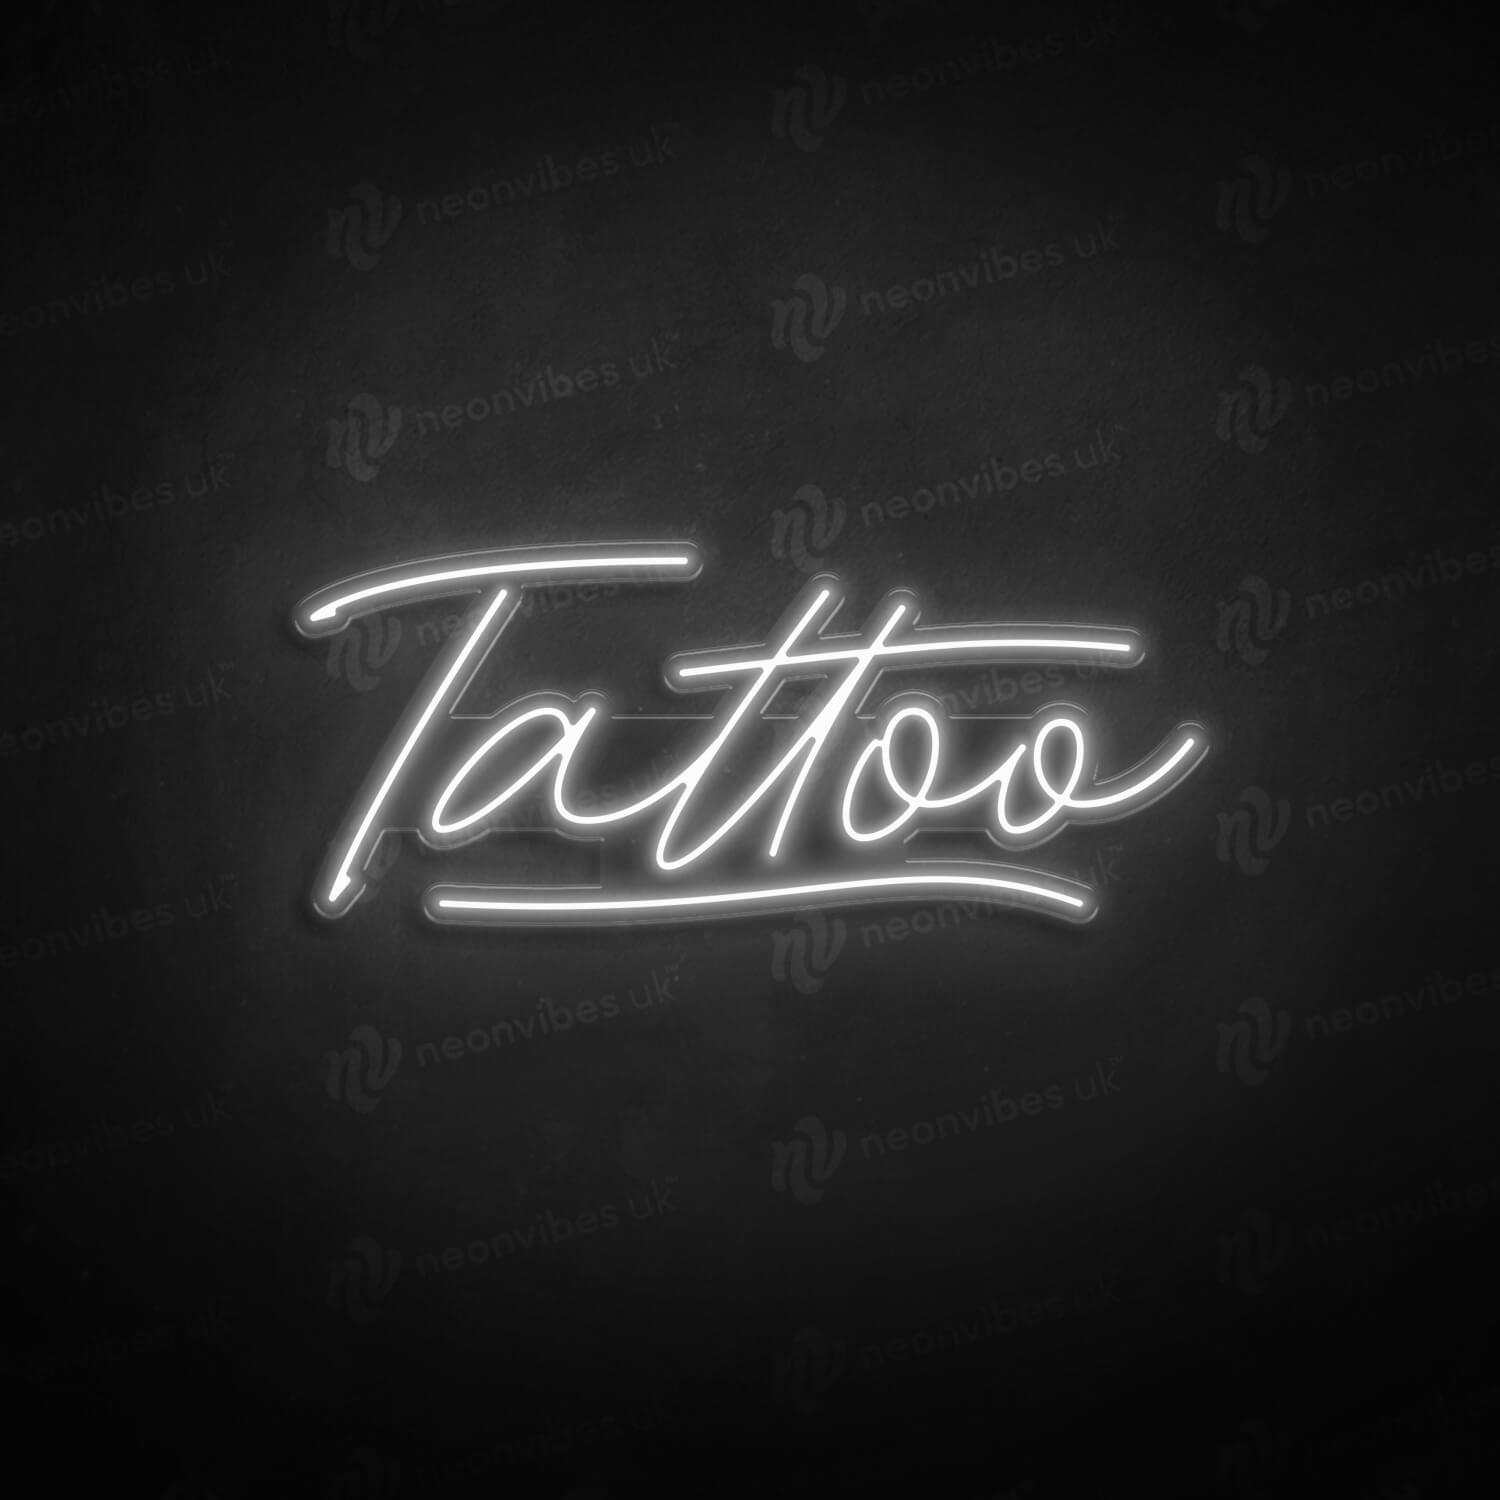 Tattoo neon sign shop stock photo Image of black blue  100162314